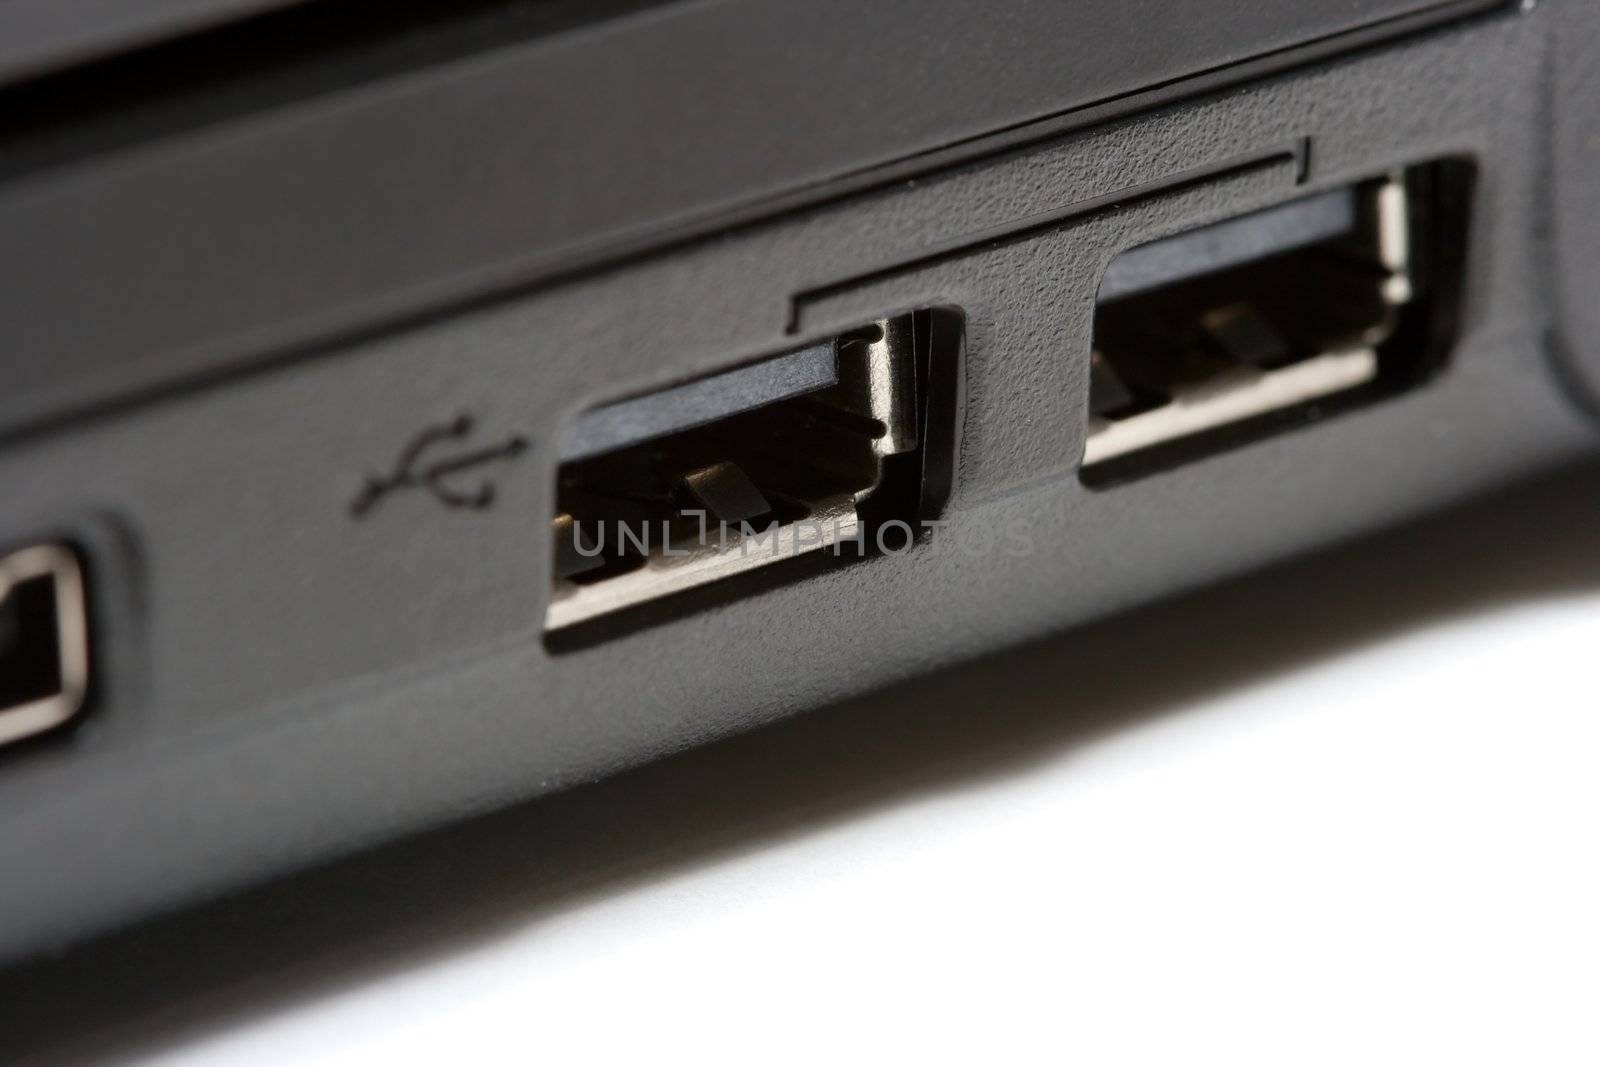 Closeup of the USB port on a laptop